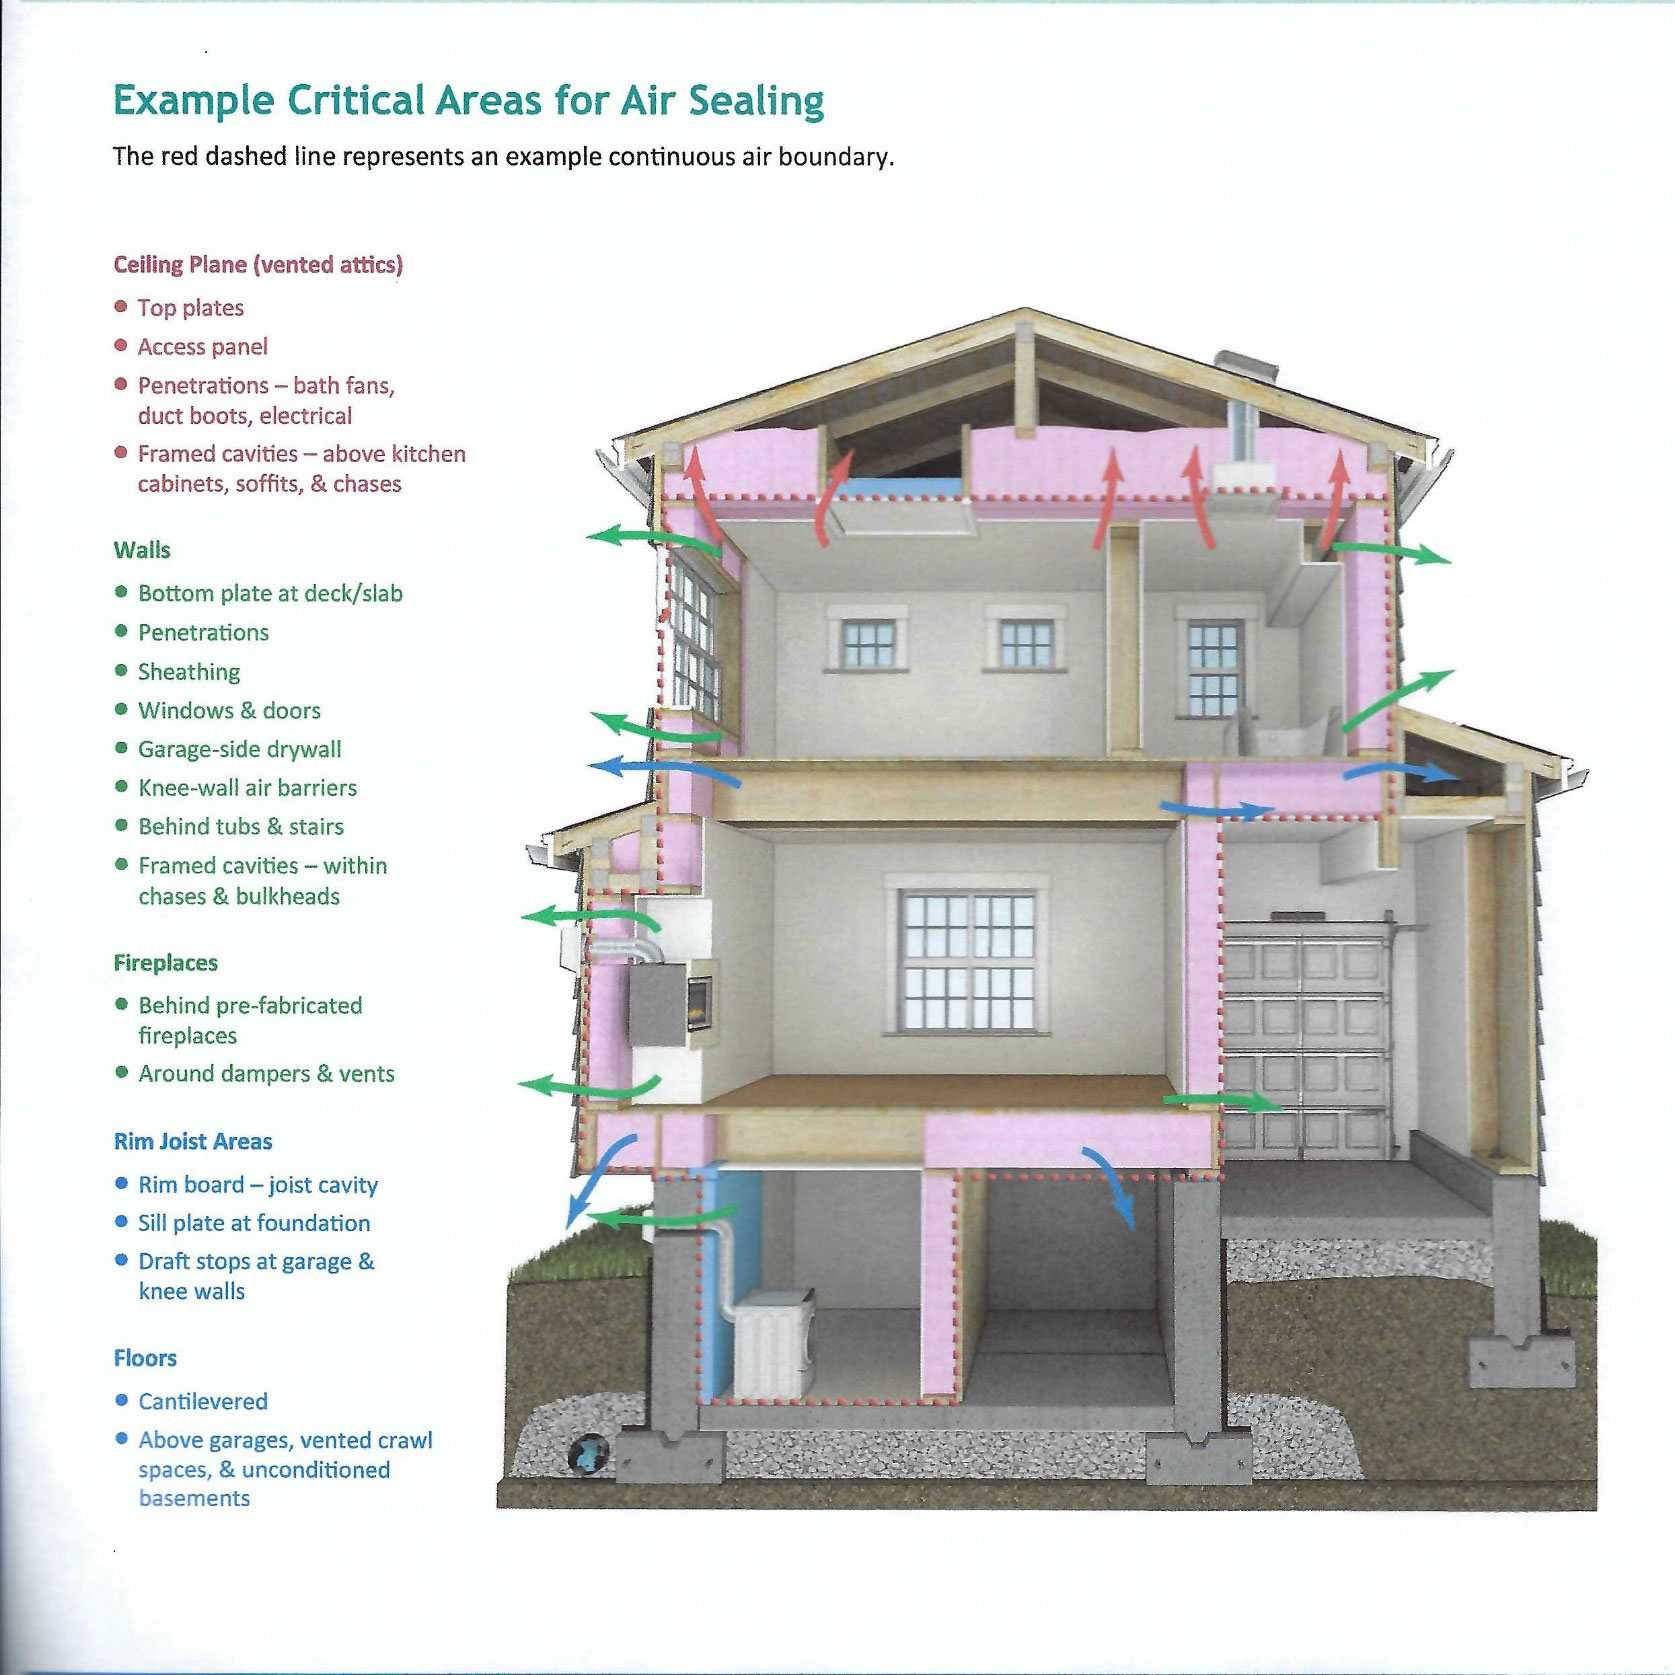 Blower Door Example Critical Areas for Air Sealing